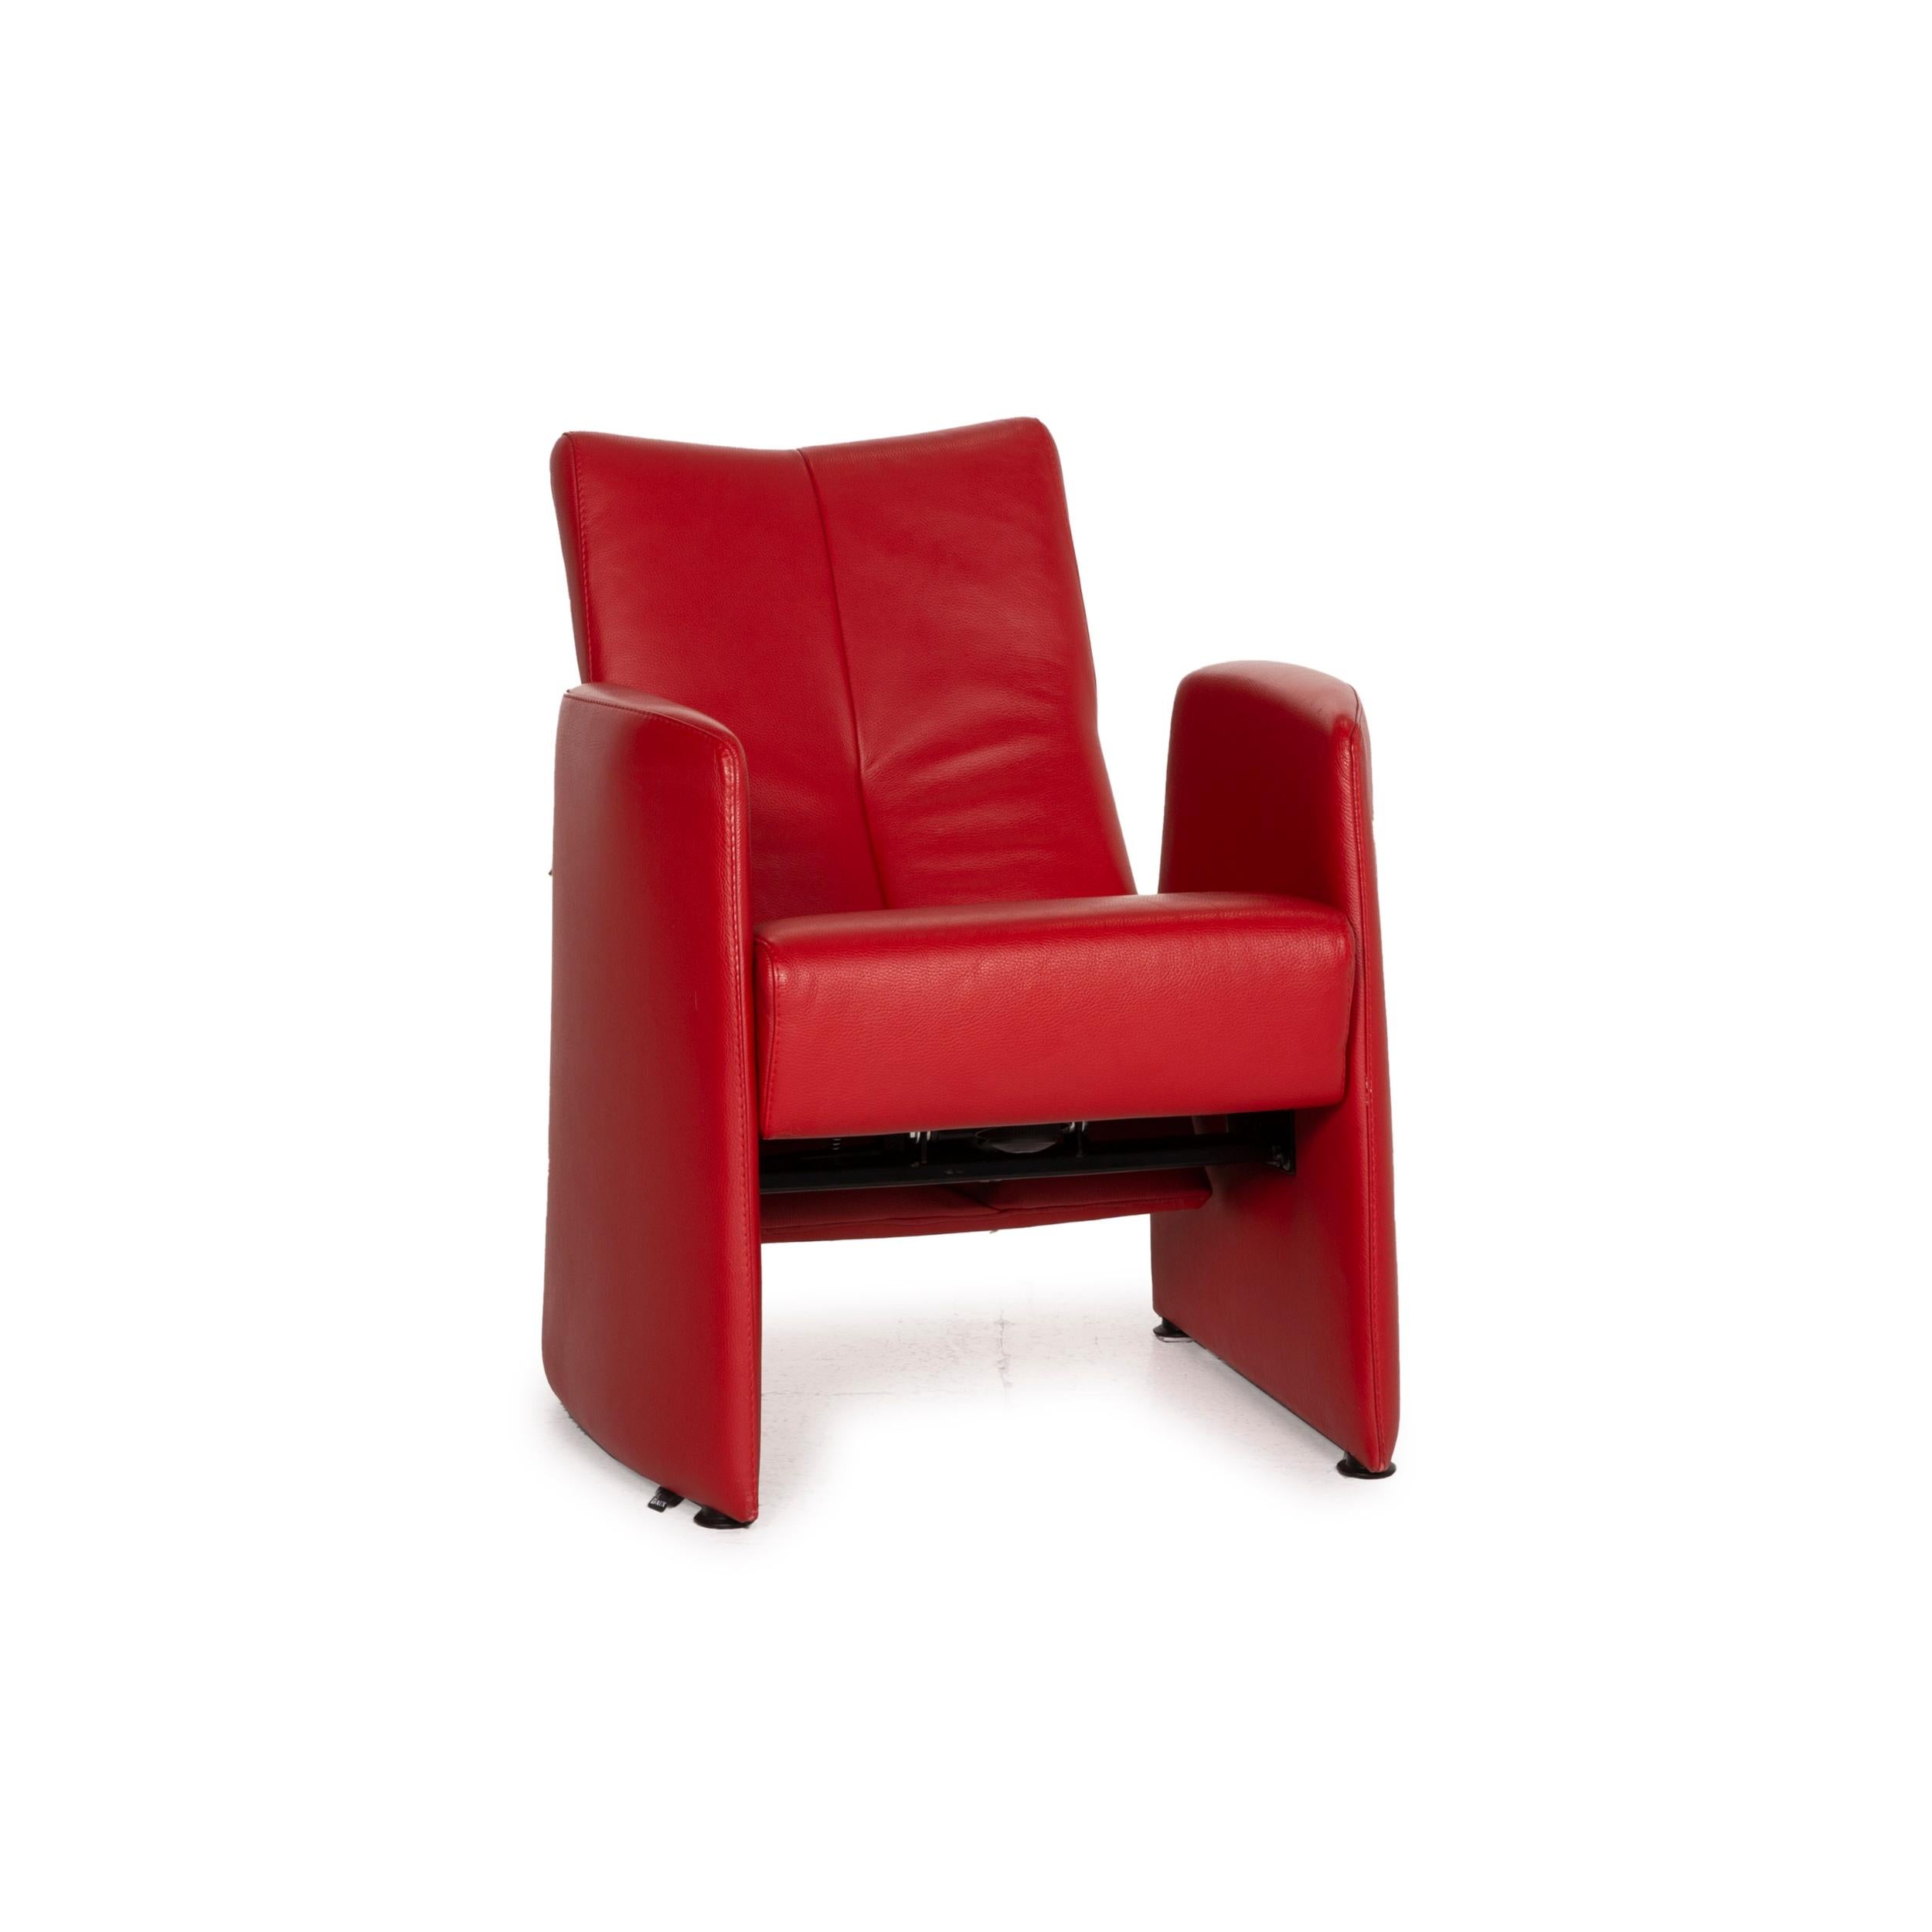 Modern Leolux Leather Armchair Red Relaxation Function